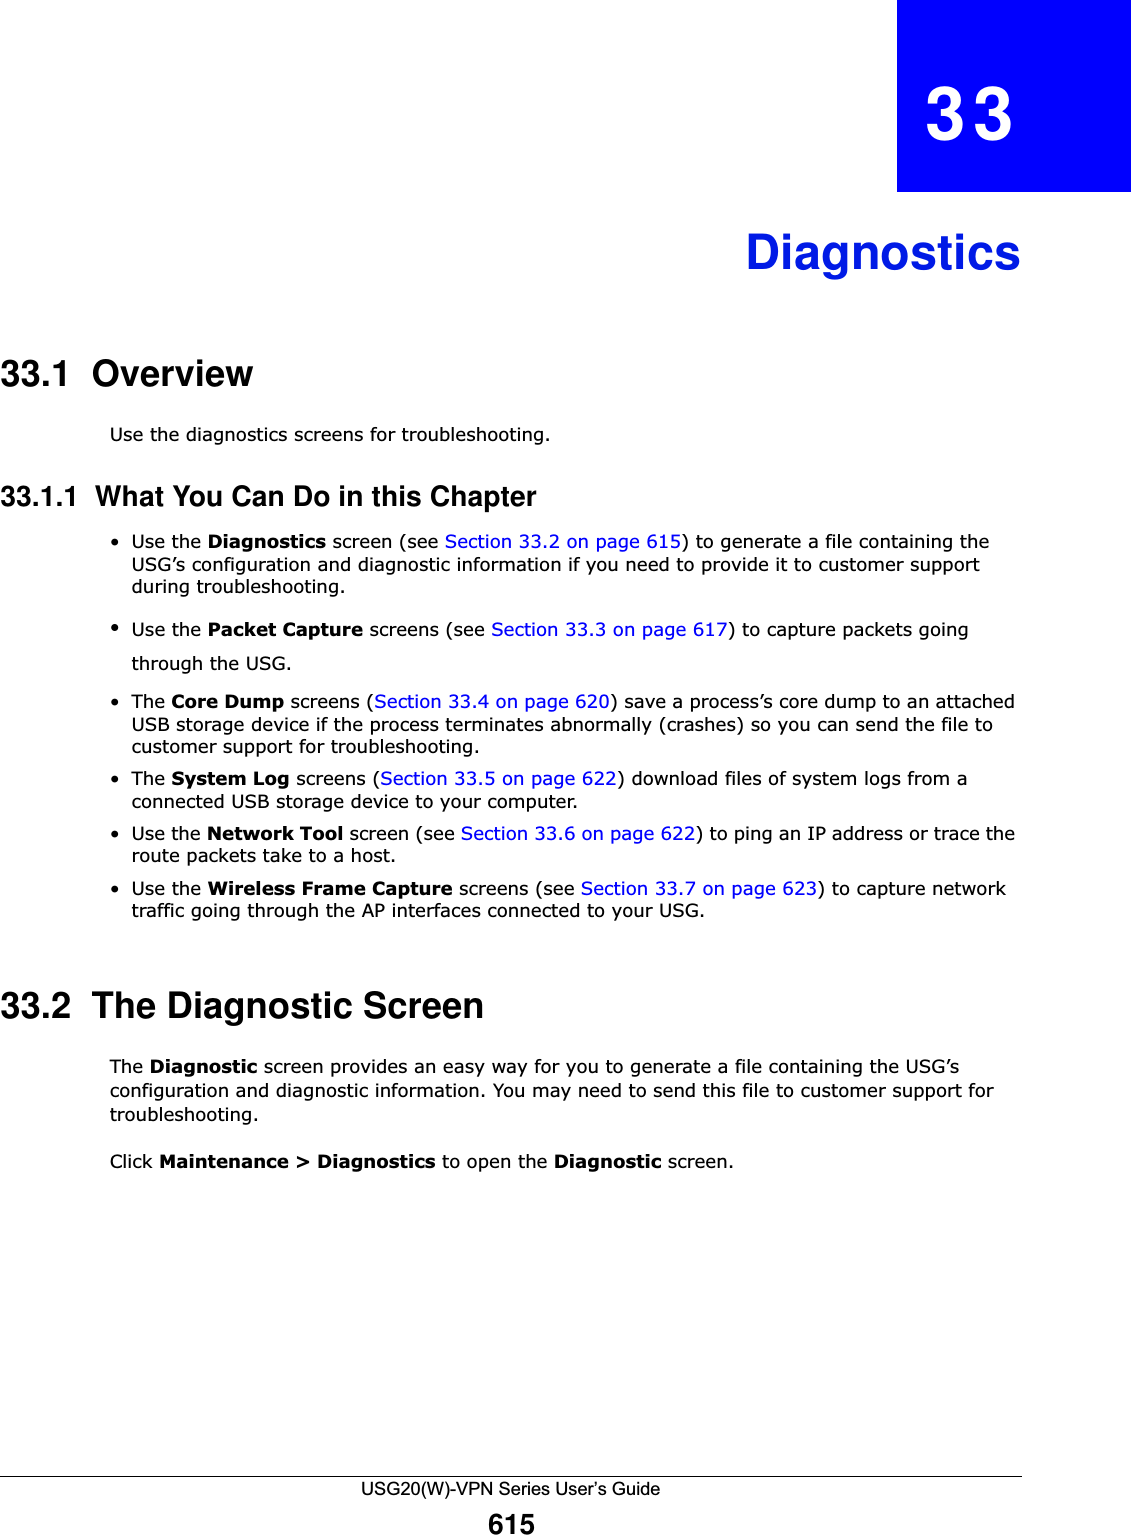 USG20(W)-VPN Series User’s Guide615CHAPTER   33Diagnostics33.1  OverviewUse the diagnostics screens for troubleshooting.33.1.1  What You Can Do in this Chapter•Use the Diagnostics screen (see Section 33.2 on page 615) to generate a file containing the USG’s configuration and diagnostic information if you need to provide it to customer support during troubleshooting.•Use the Packet Capture screens (see Section 33.3 on page 617) to capture packets going through the USG.•The Core Dump screens (Section 33.4 on page 620) save a process’s core dump to an attached USB storage device if the process terminates abnormally (crashes) so you can send the file to customer support for troubleshooting.•The System Log screens (Section 33.5 on page 622) download files of system logs from a connected USB storage device to your computer.•Use the Network Tool screen (see Section 33.6 on page 622) to ping an IP address or trace the route packets take to a host.•Use the Wireless Frame Capture screens (see Section 33.7 on page 623) to capture network traffic going through the AP interfaces connected to your USG.33.2  The Diagnostic ScreenThe Diagnostic screen provides an easy way for you to generate a file containing the USG’s configuration and diagnostic information. You may need to send this file to customer support for troubleshooting.Click Maintenance &gt; Diagnostics to open the Diagnostic screen. 